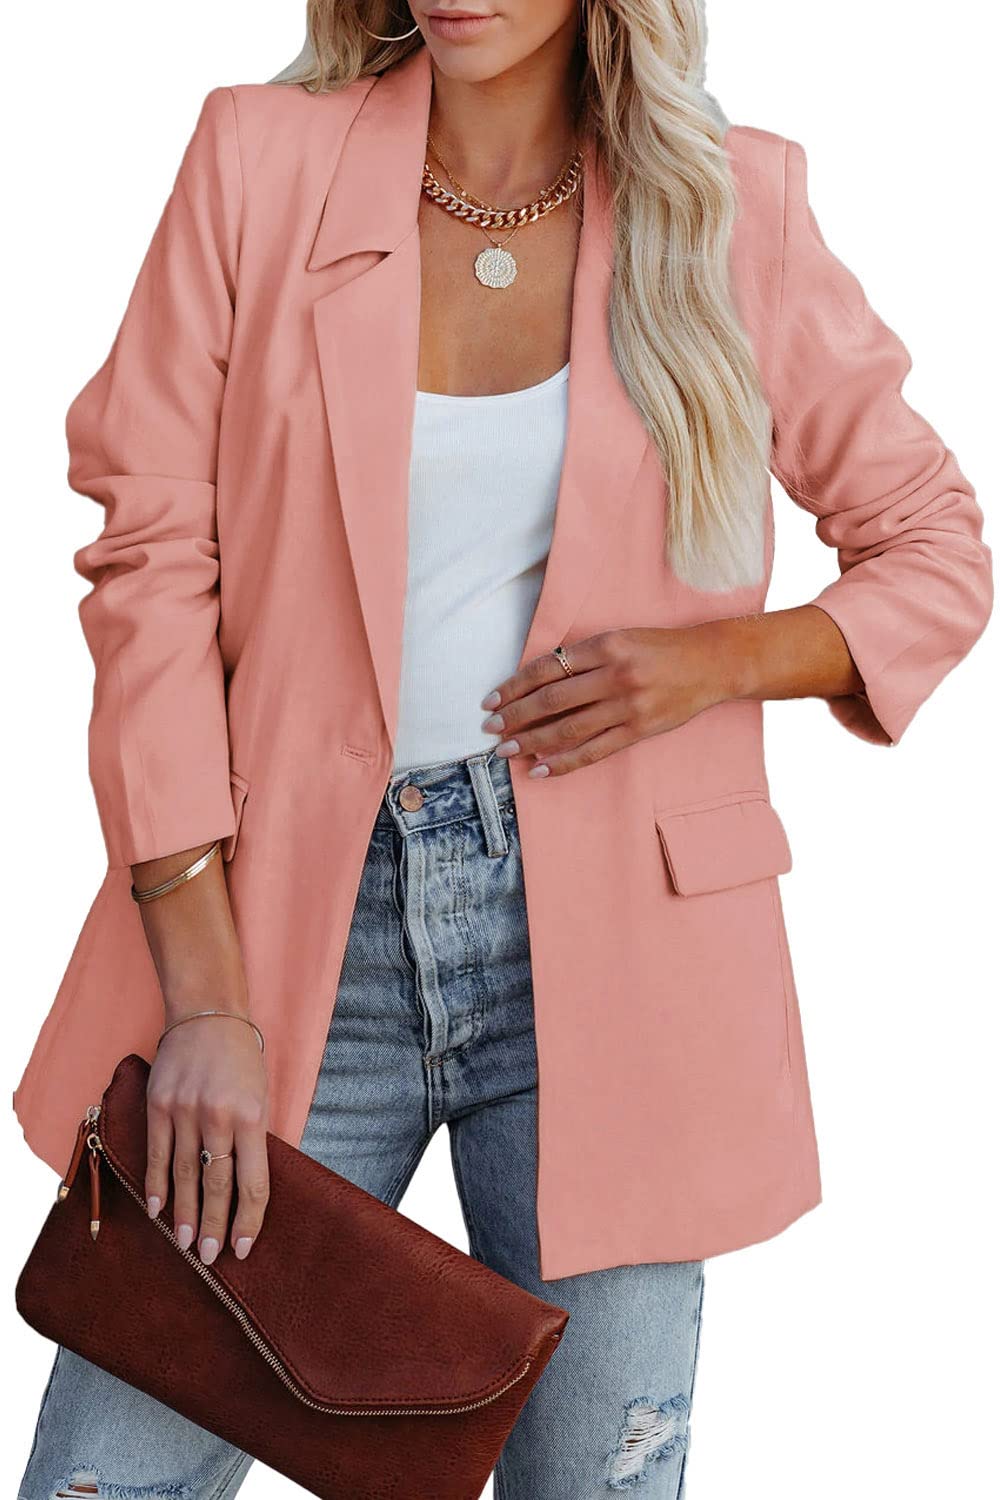 Prettygarden Womens Casual Blazers Long Sleeve Open Front Button Work Office Blazer Jackets With Pockets (Pink,Large)